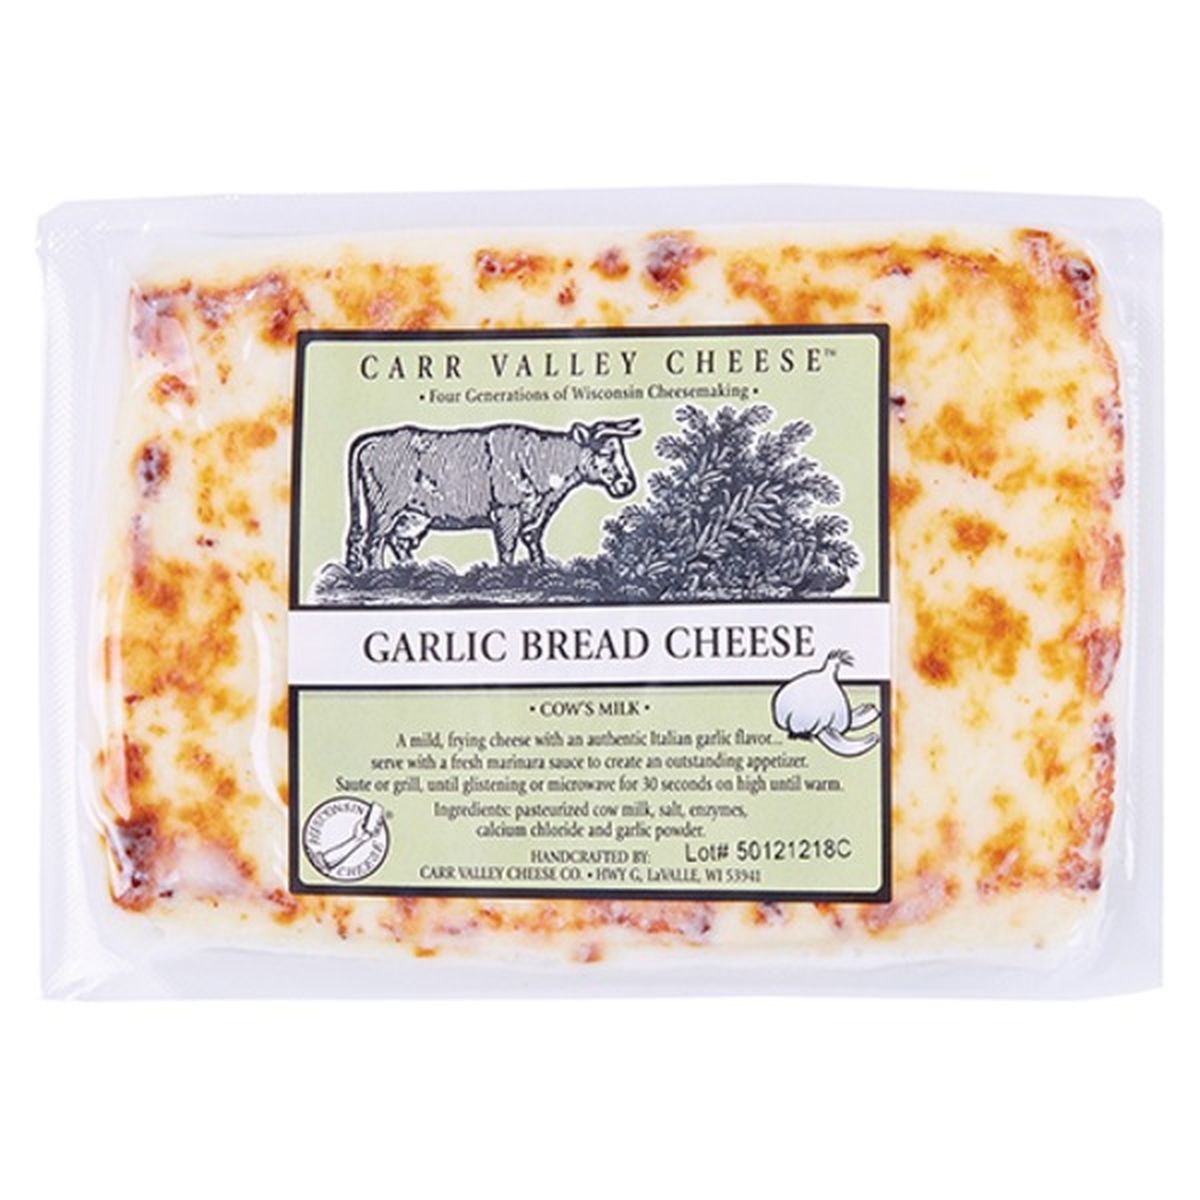 Calories in Carr Valley Cheese Garlic Bread Cheese